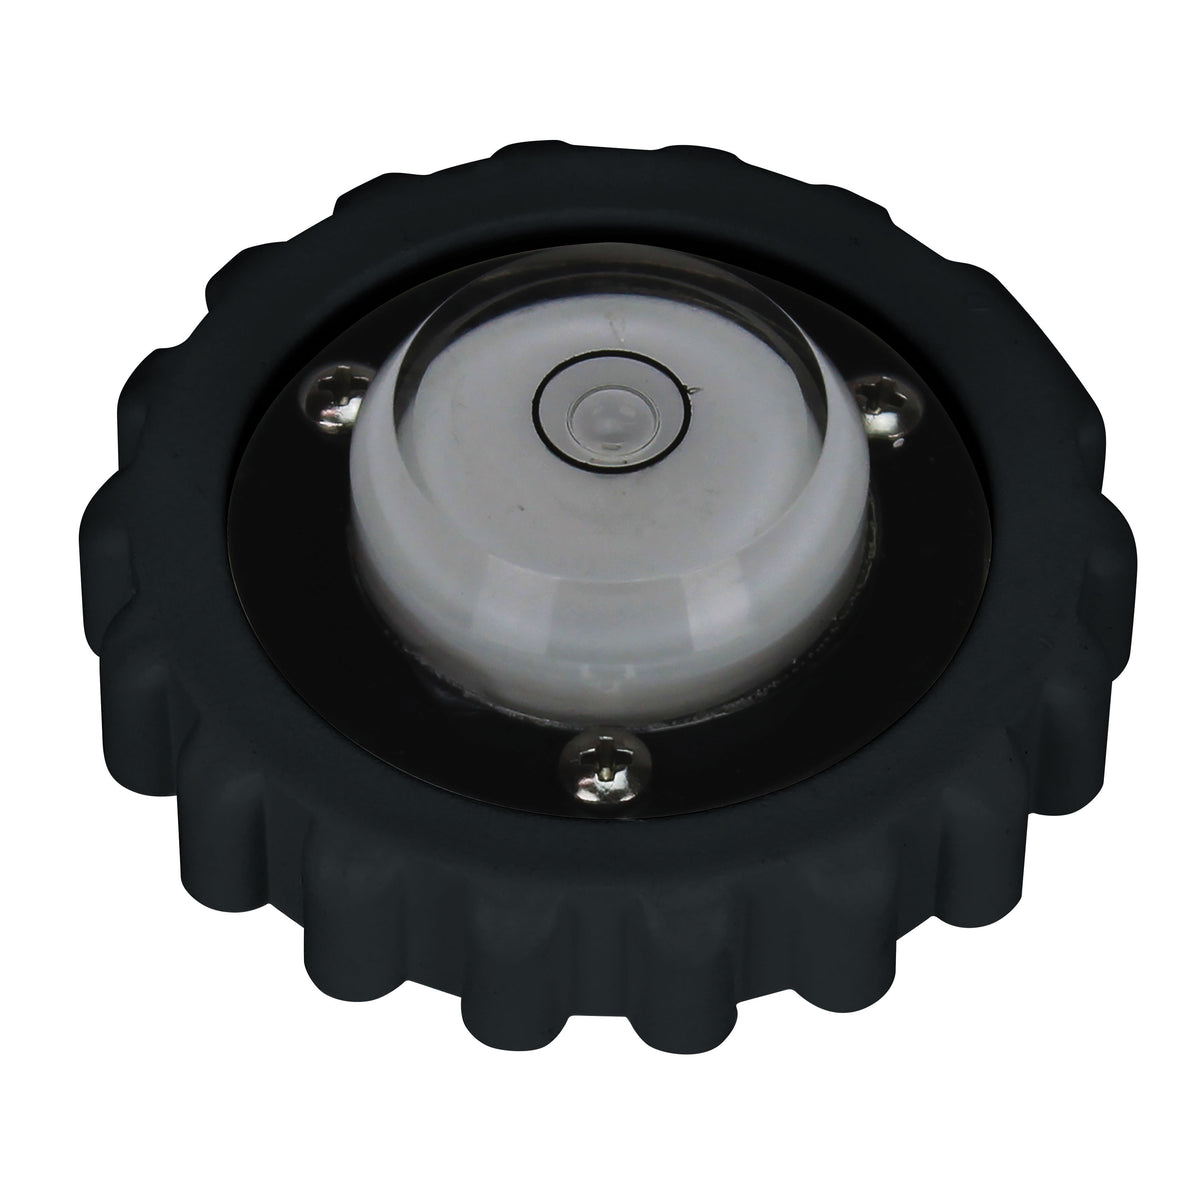 Quick Products JQ-RLB Replacement Bubble Level Cap for Electric Tongue Jack - Black